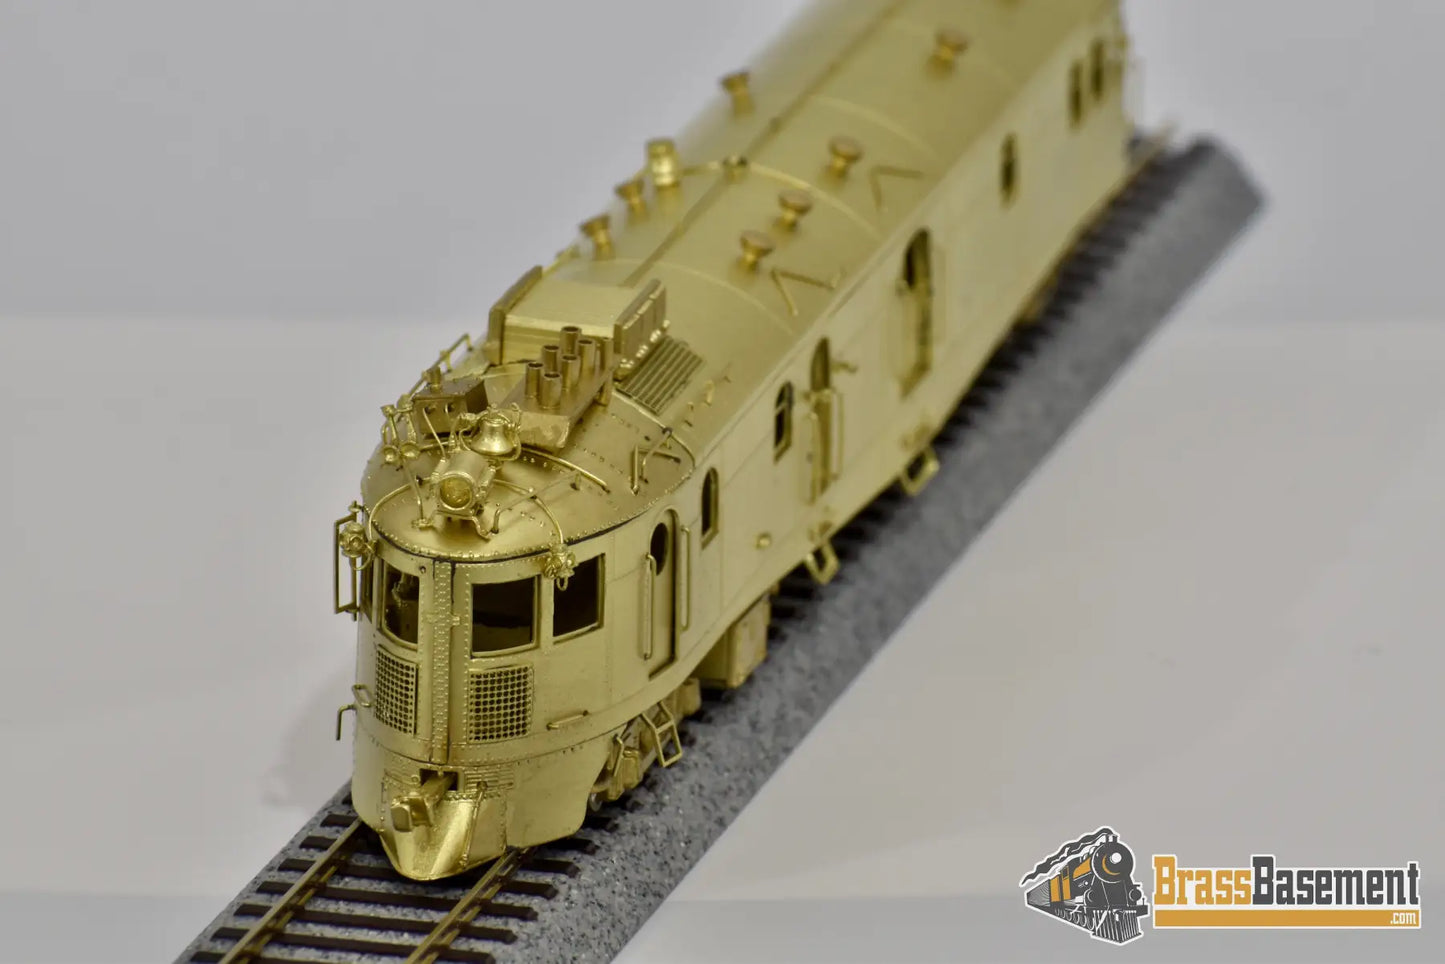 Ho Brass - Omi 1807 Union Pacific Up Mckeen Car #M - 24 And Trailer Mint Diesel